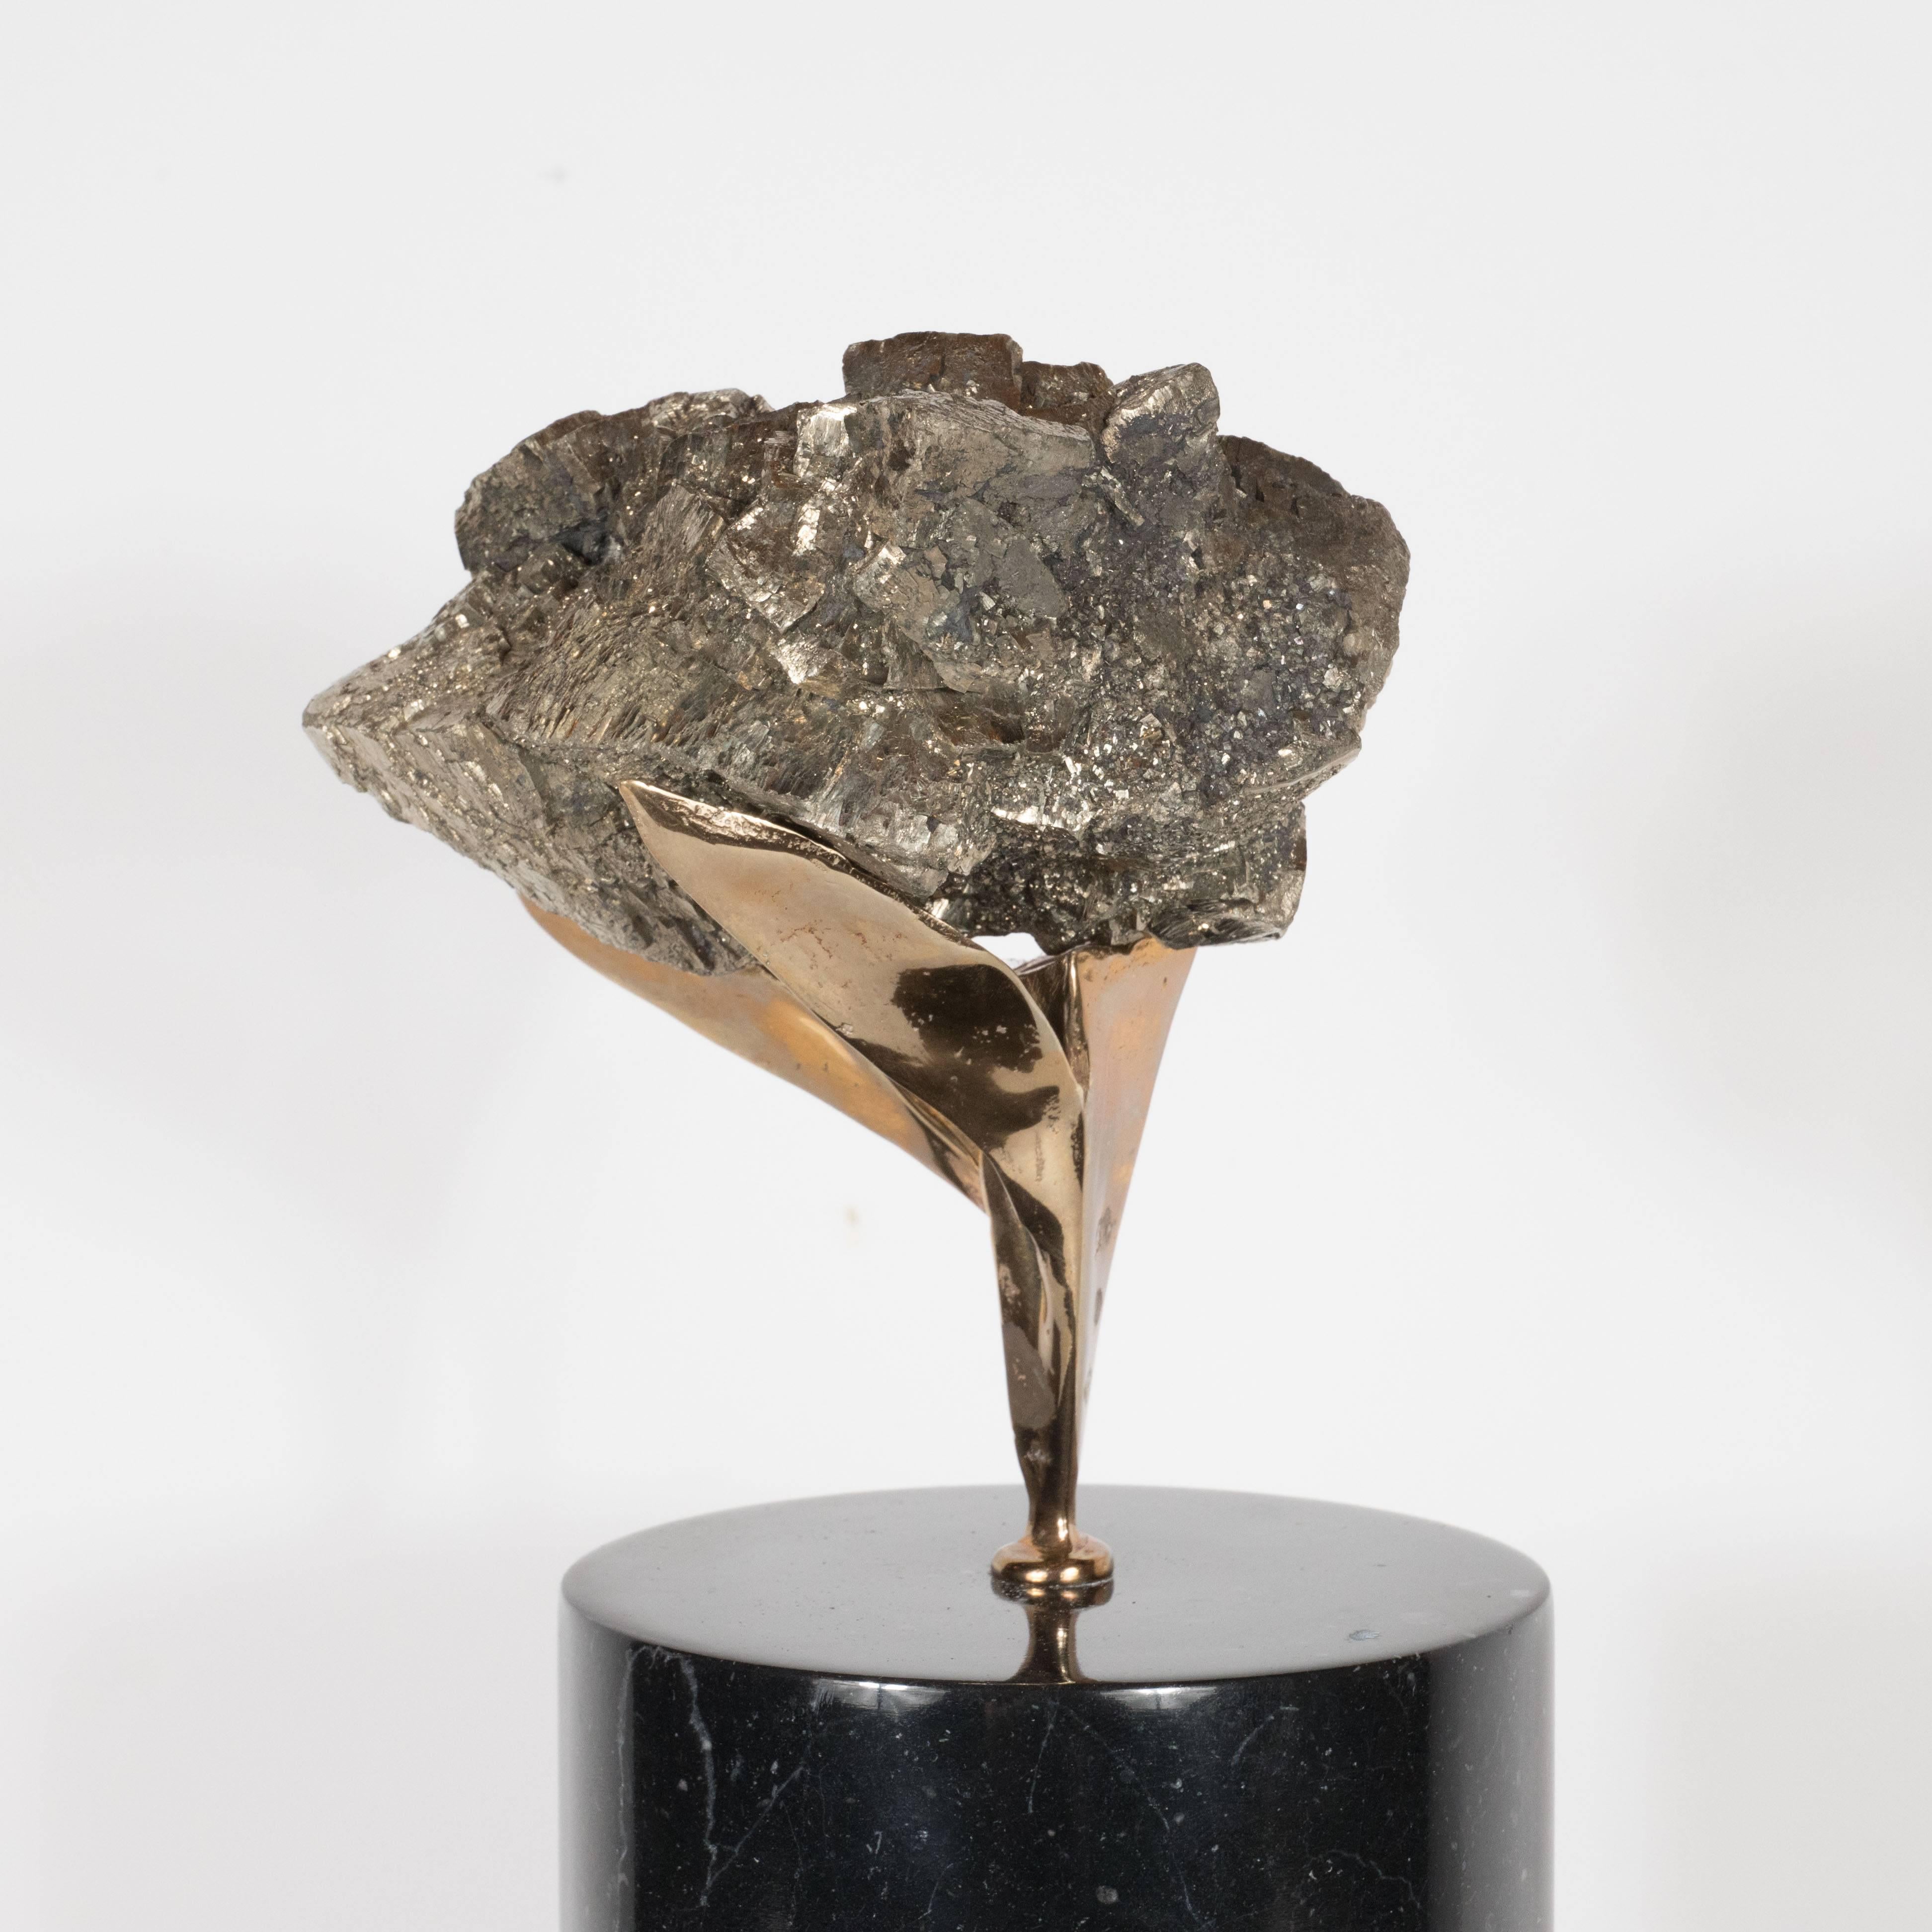 This sculpture consists of a hunk of pyrite, a mineral whose tone lies somewhere between silver and gold. Consequently, it is an extremely versatile color, blending with both of these precious metals hues and virtually every other color. The stone's